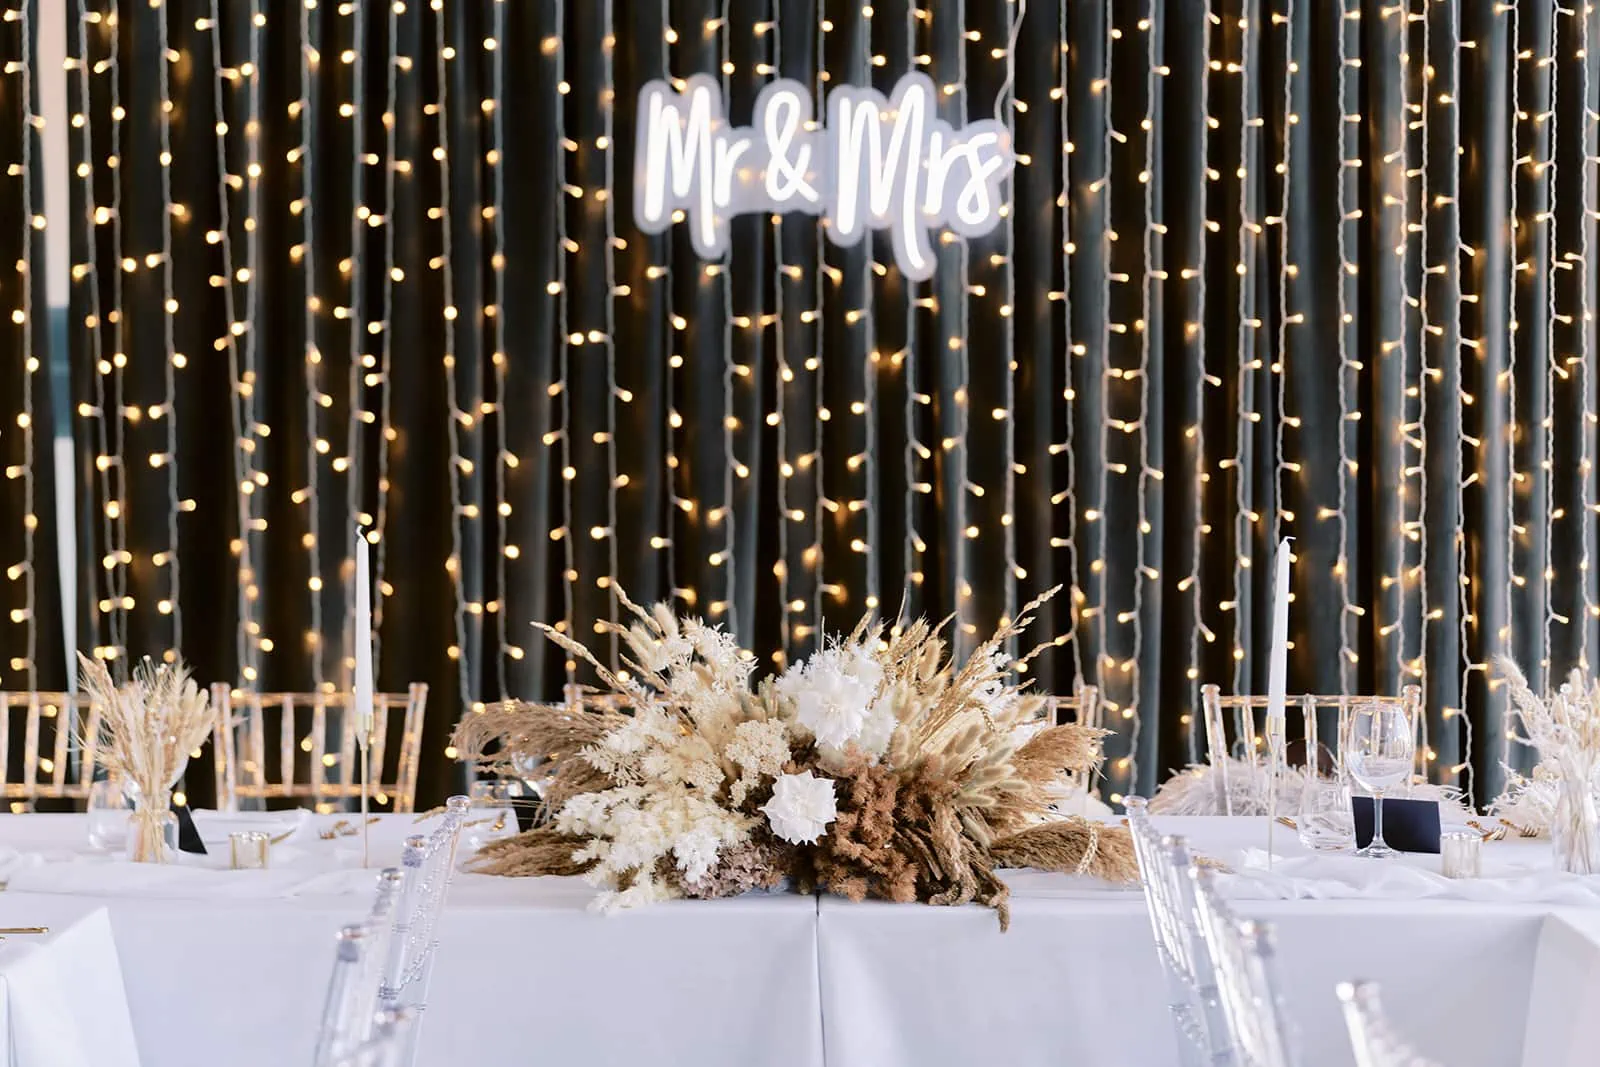 Queenstown Elopement Heli Wedding Photographer クイーンズタウン結婚式 | Melissa and Scott's wedding reception at Kamana Lakehouse with white tablecloths and string lights.